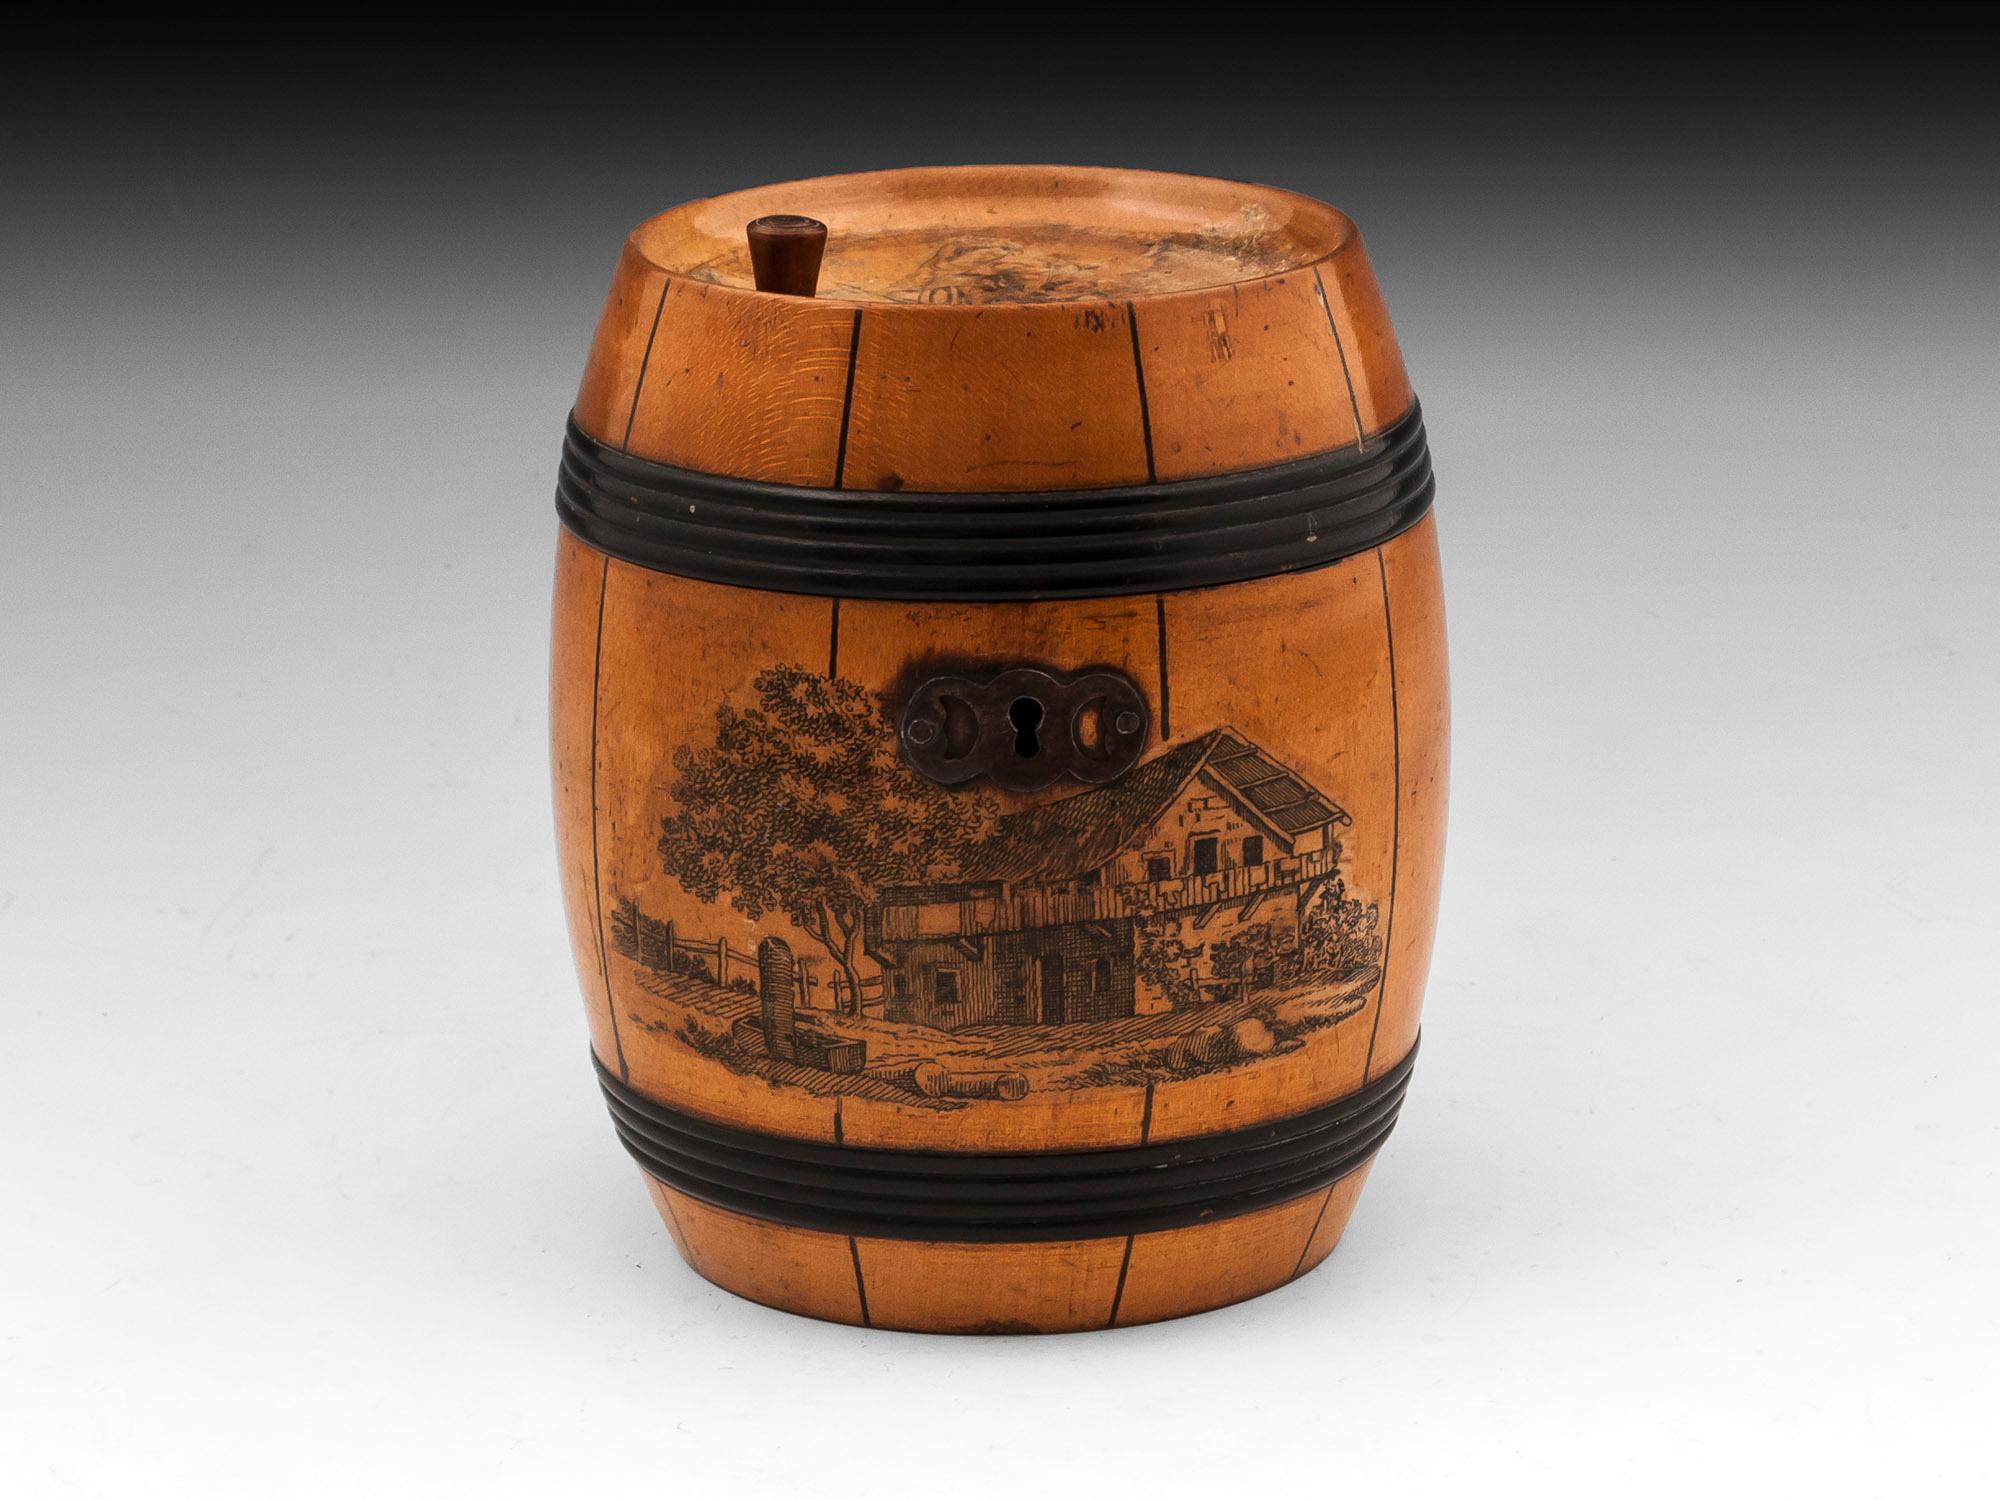 Unusual tea caddy in the shape of a barrel, with ebonised strapping and transferware prints. With a steel oval escutcheon, lock and hinge. 

The interior of the Barrel tea caddy contains trace of its original lining and has a fully working lock